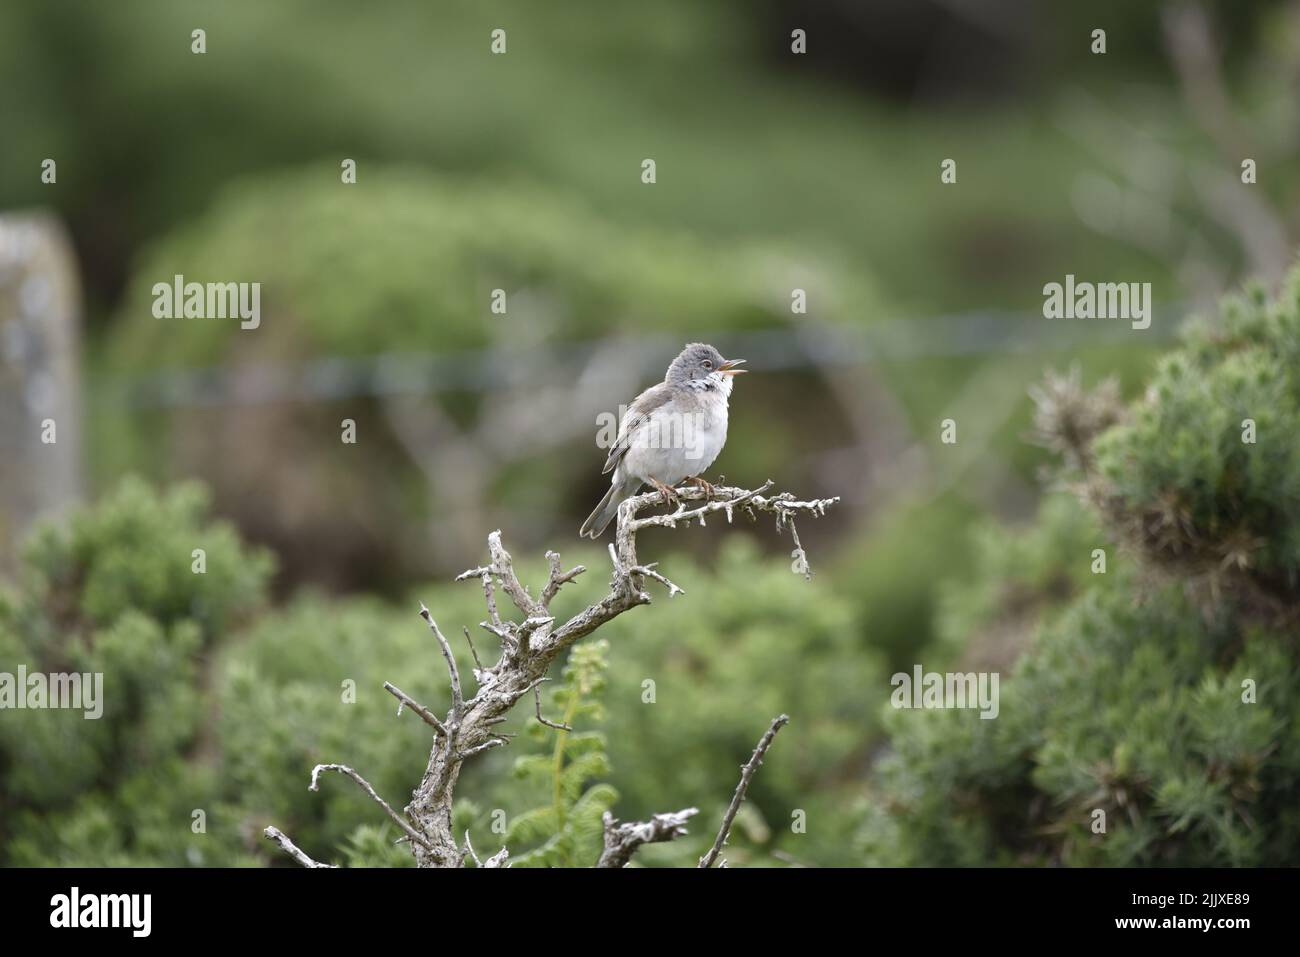 Whitethroat (Sylvia communis) Singing While Perched on a Bare Branch in Right-Profile, Against a Green Foliage Background on the Isle of Man in June. Stock Photo